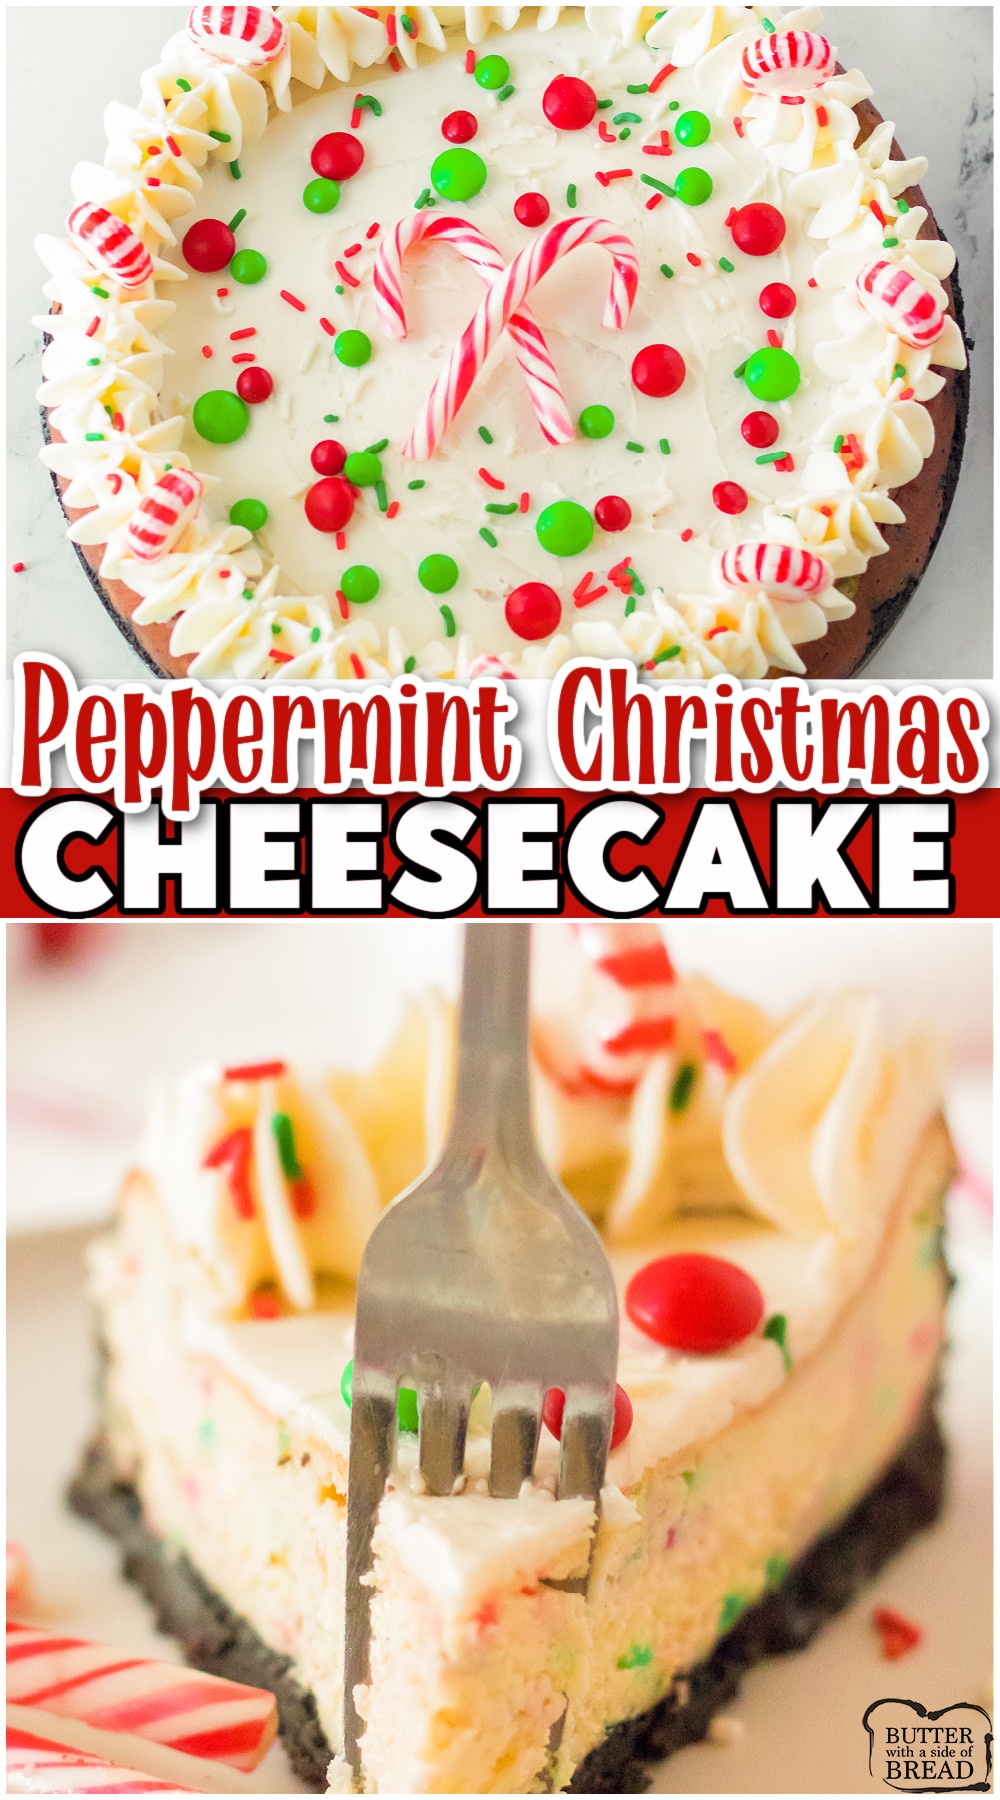 Christmas Cheesecake made with butter, cream cheese & sugar, then topped with piped buttercream & peppermints! Festive peppermint vanilla cheesecake that's both easy to make & gorgeous when served!